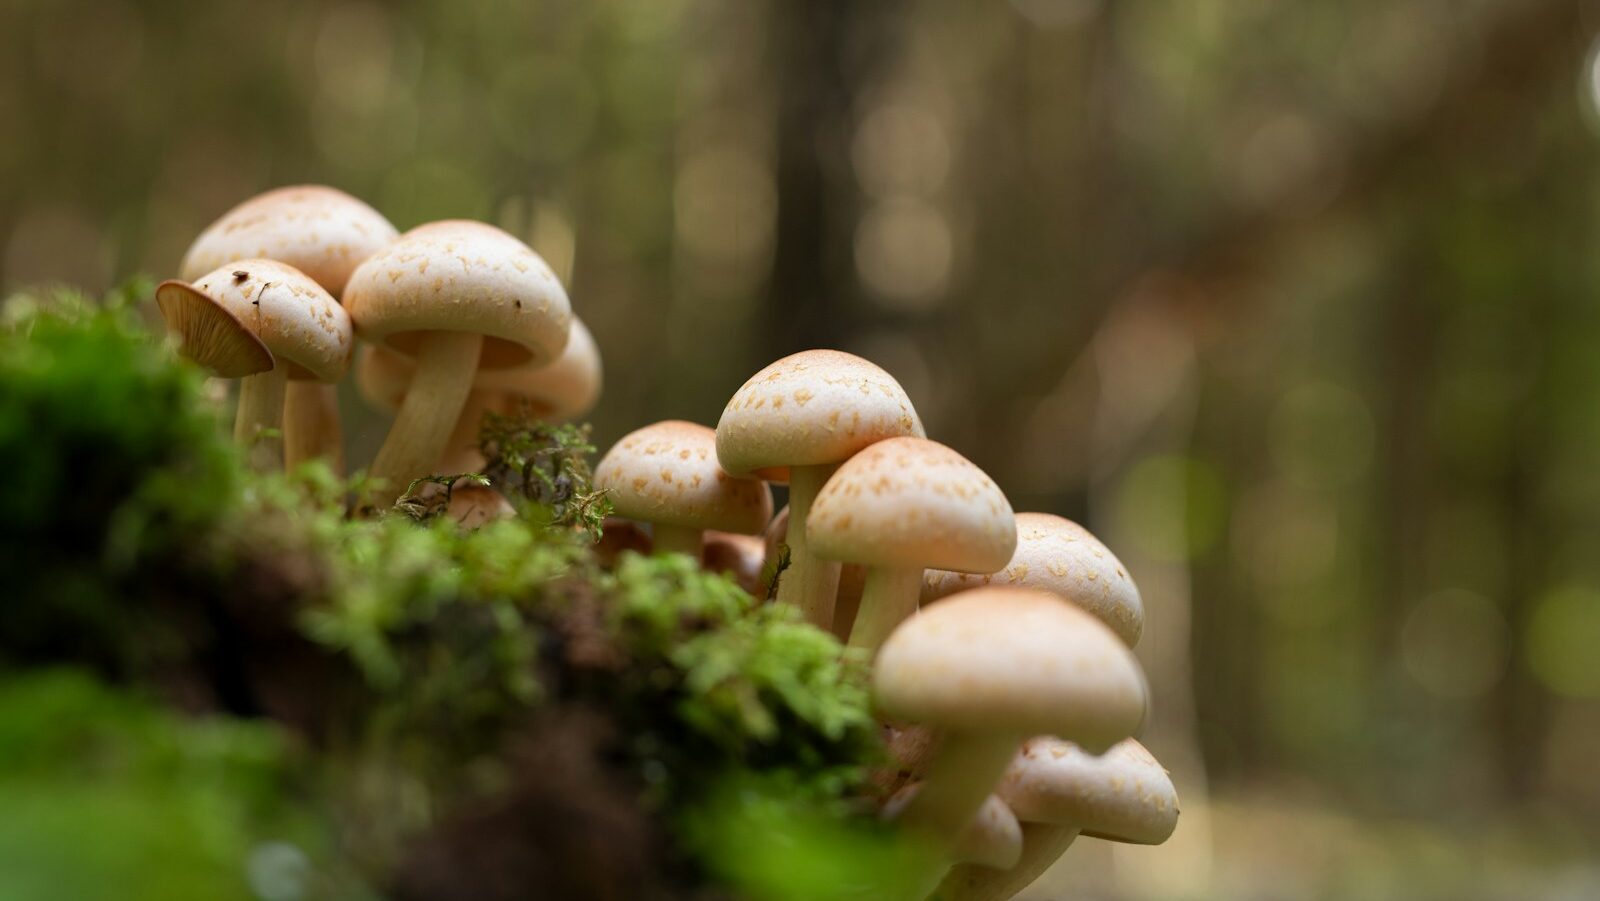 a group of mushrooms growing in moss